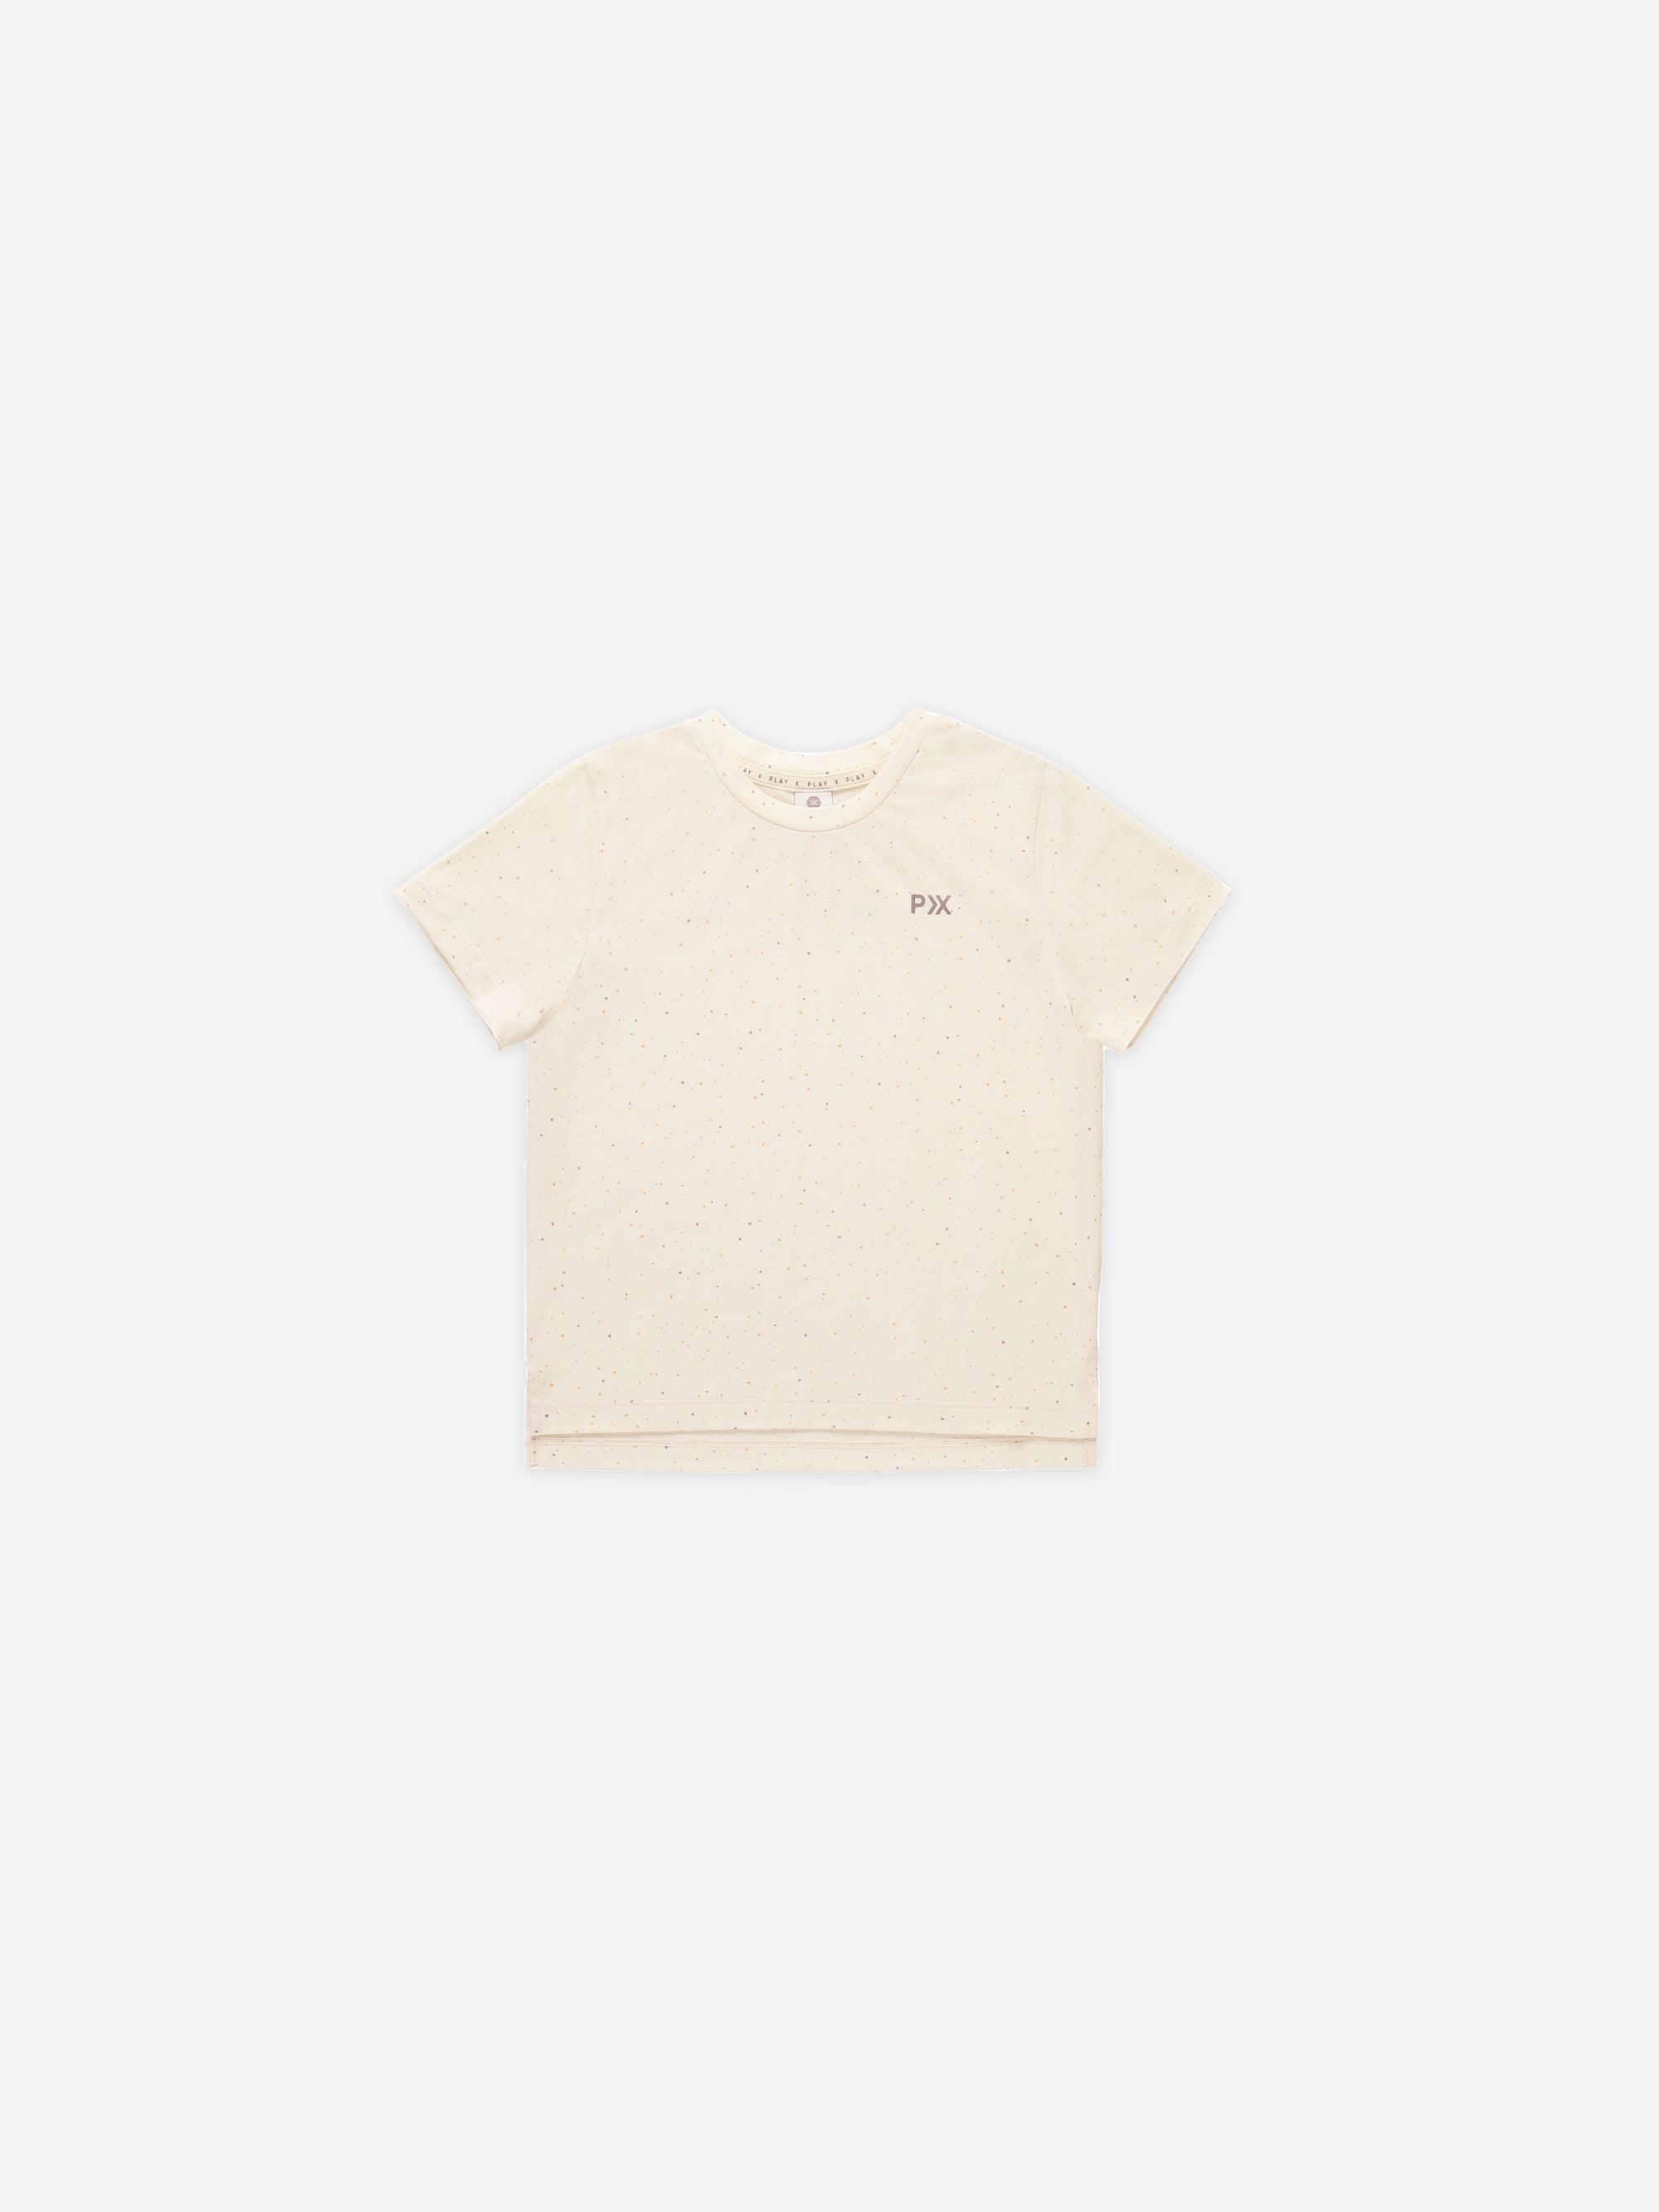 Cove Essential Tee || Natural Speckle - Rylee + Cru | Kids Clothes | Trendy Baby Clothes | Modern Infant Outfits |